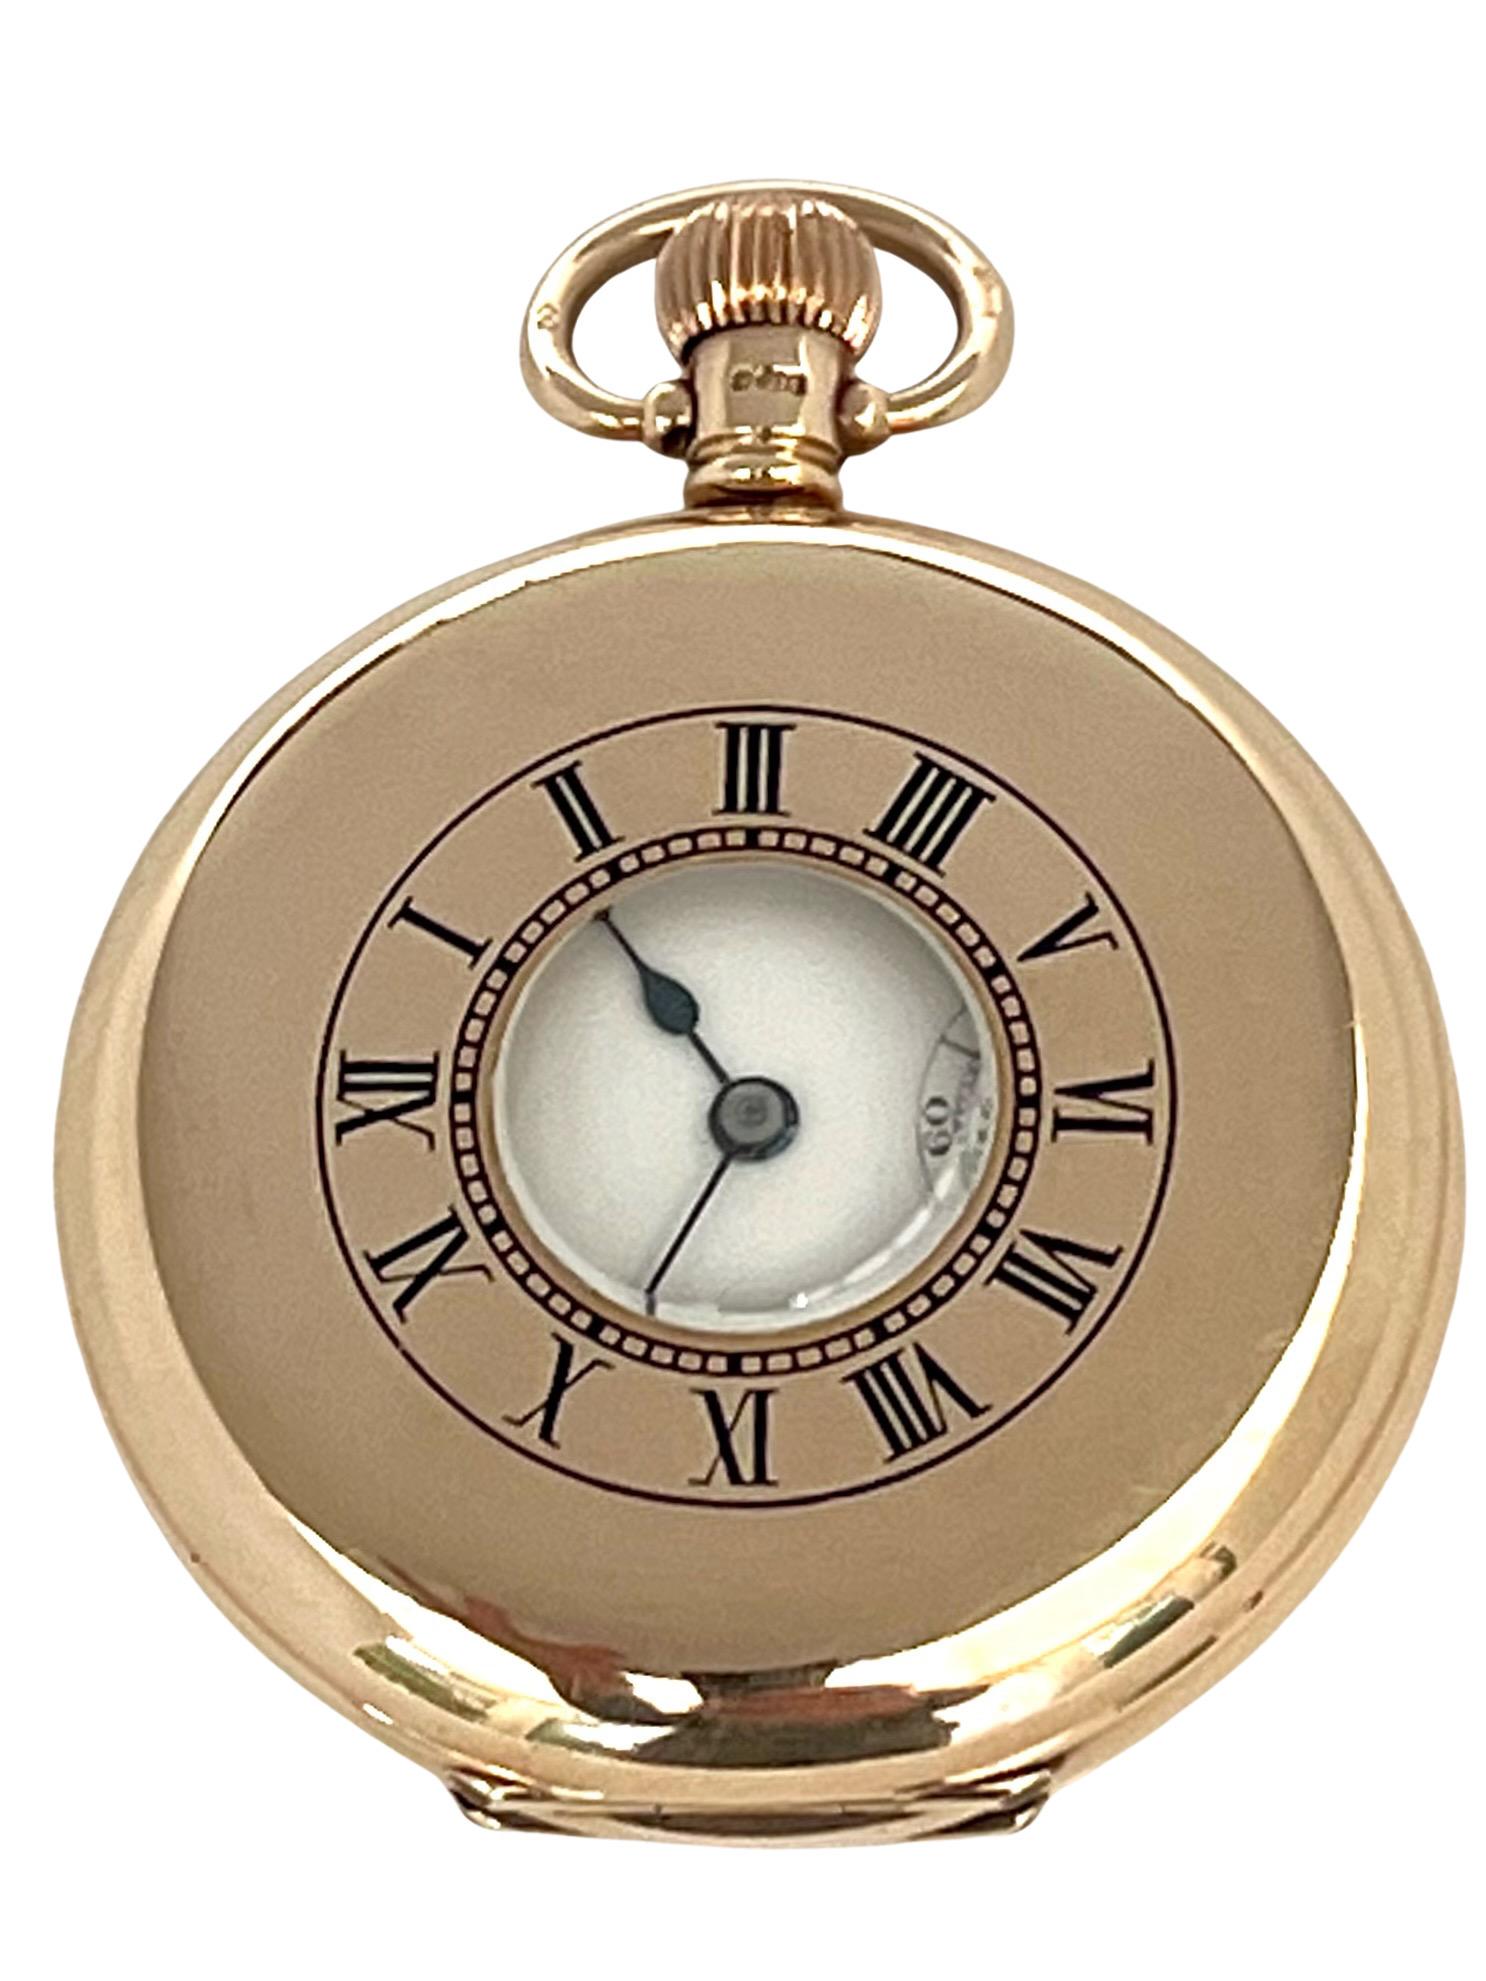 A substantial 9 carat solid gold half hunter pocket watch by Marvin Watch Company, Switzerland. Fully hallmarked Birmingham, 1912.

With a gold winding crown and bow to the top, the outer engraved Roman dial on the case front with central glass and